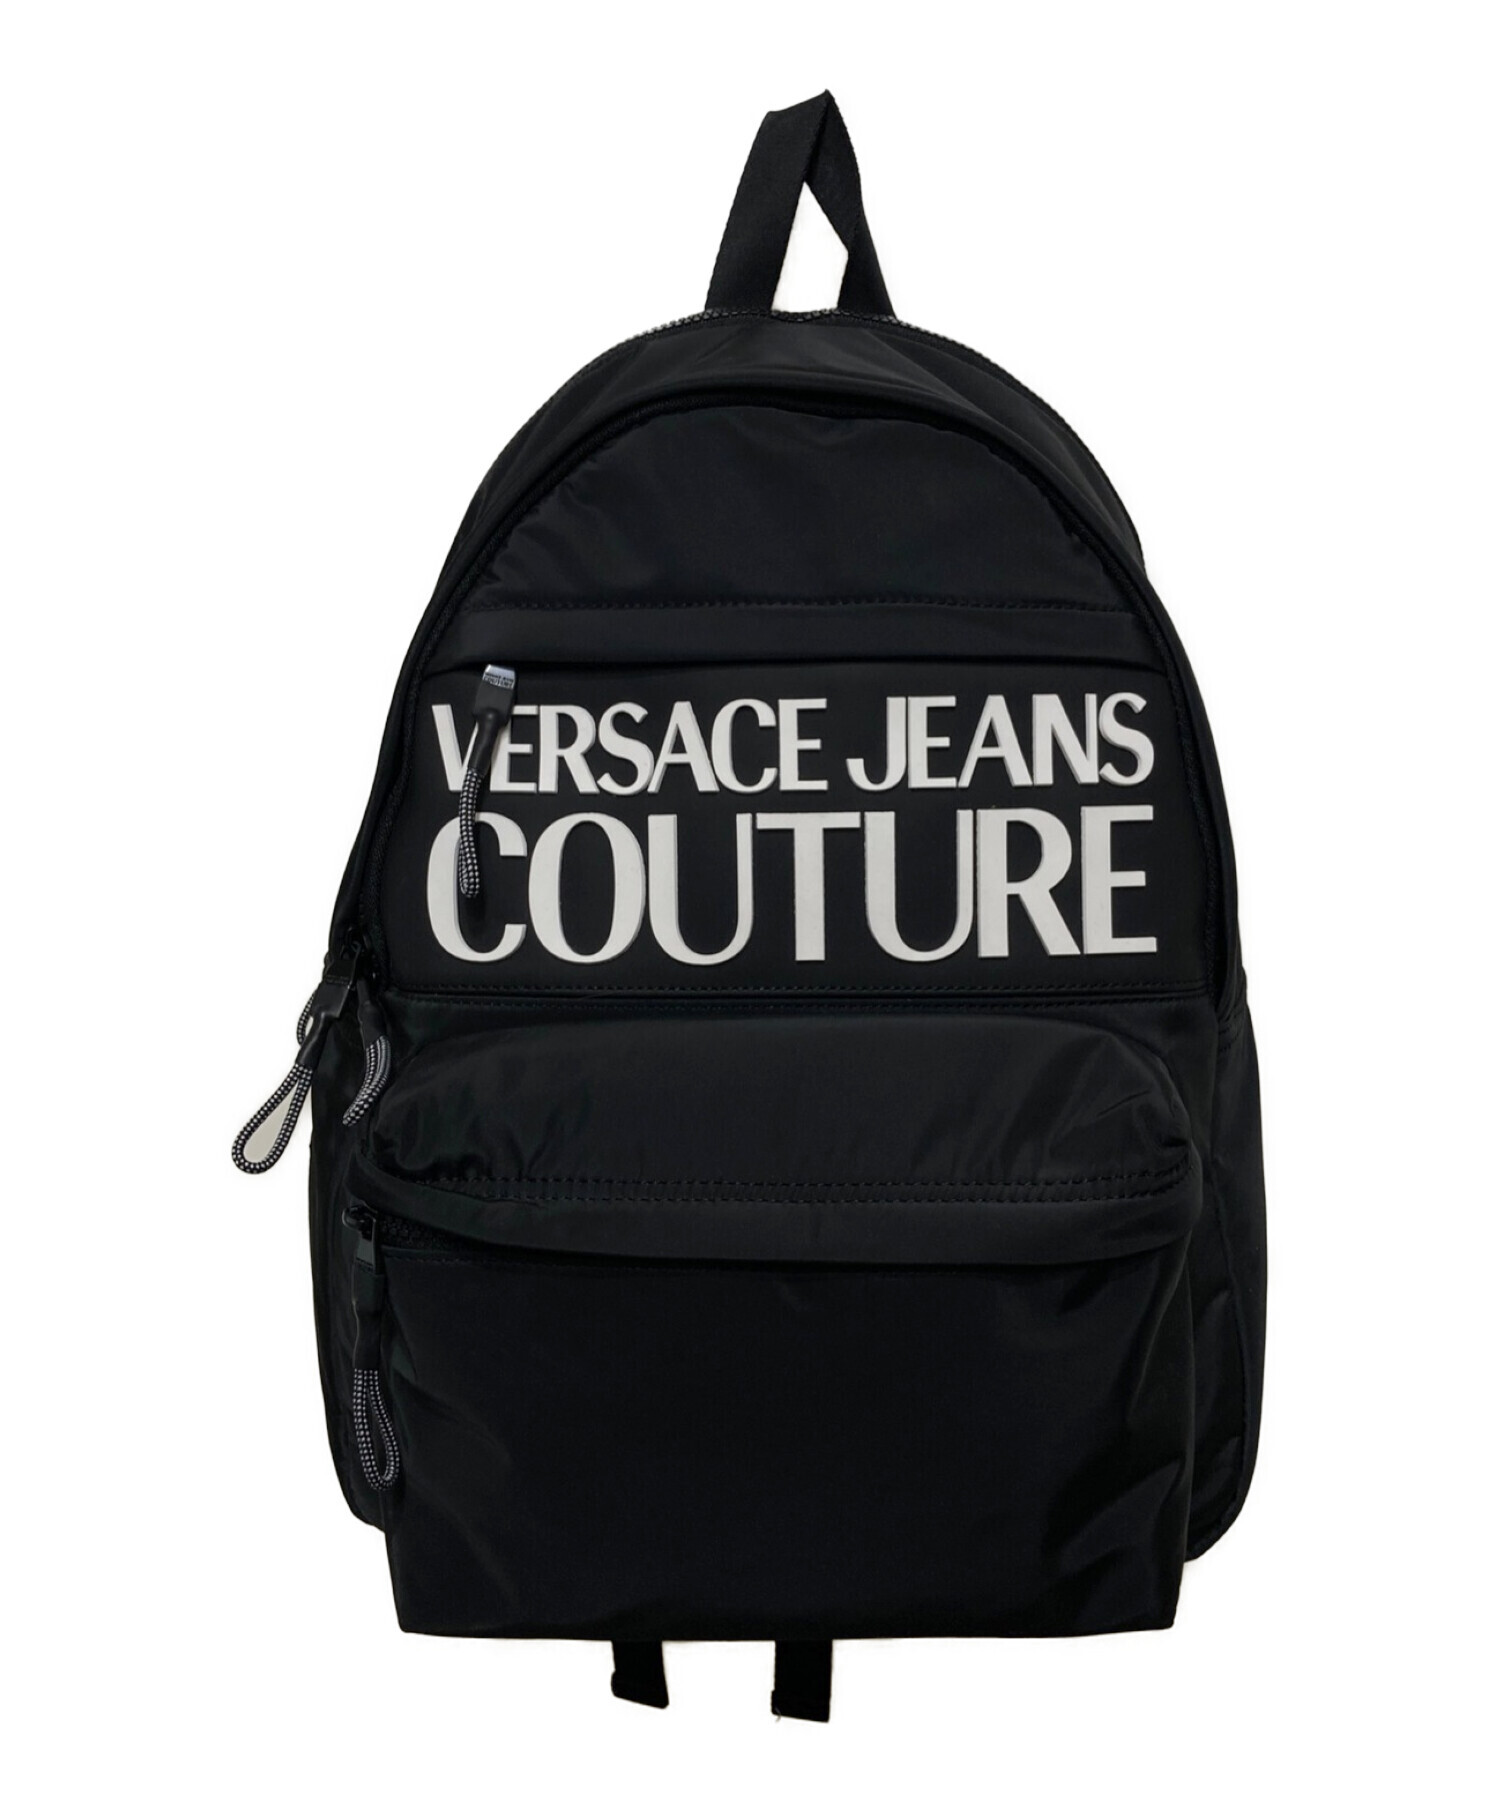 VERSACE JEANS COUTURE リュック ブラック グレー - バッグパック/リュック